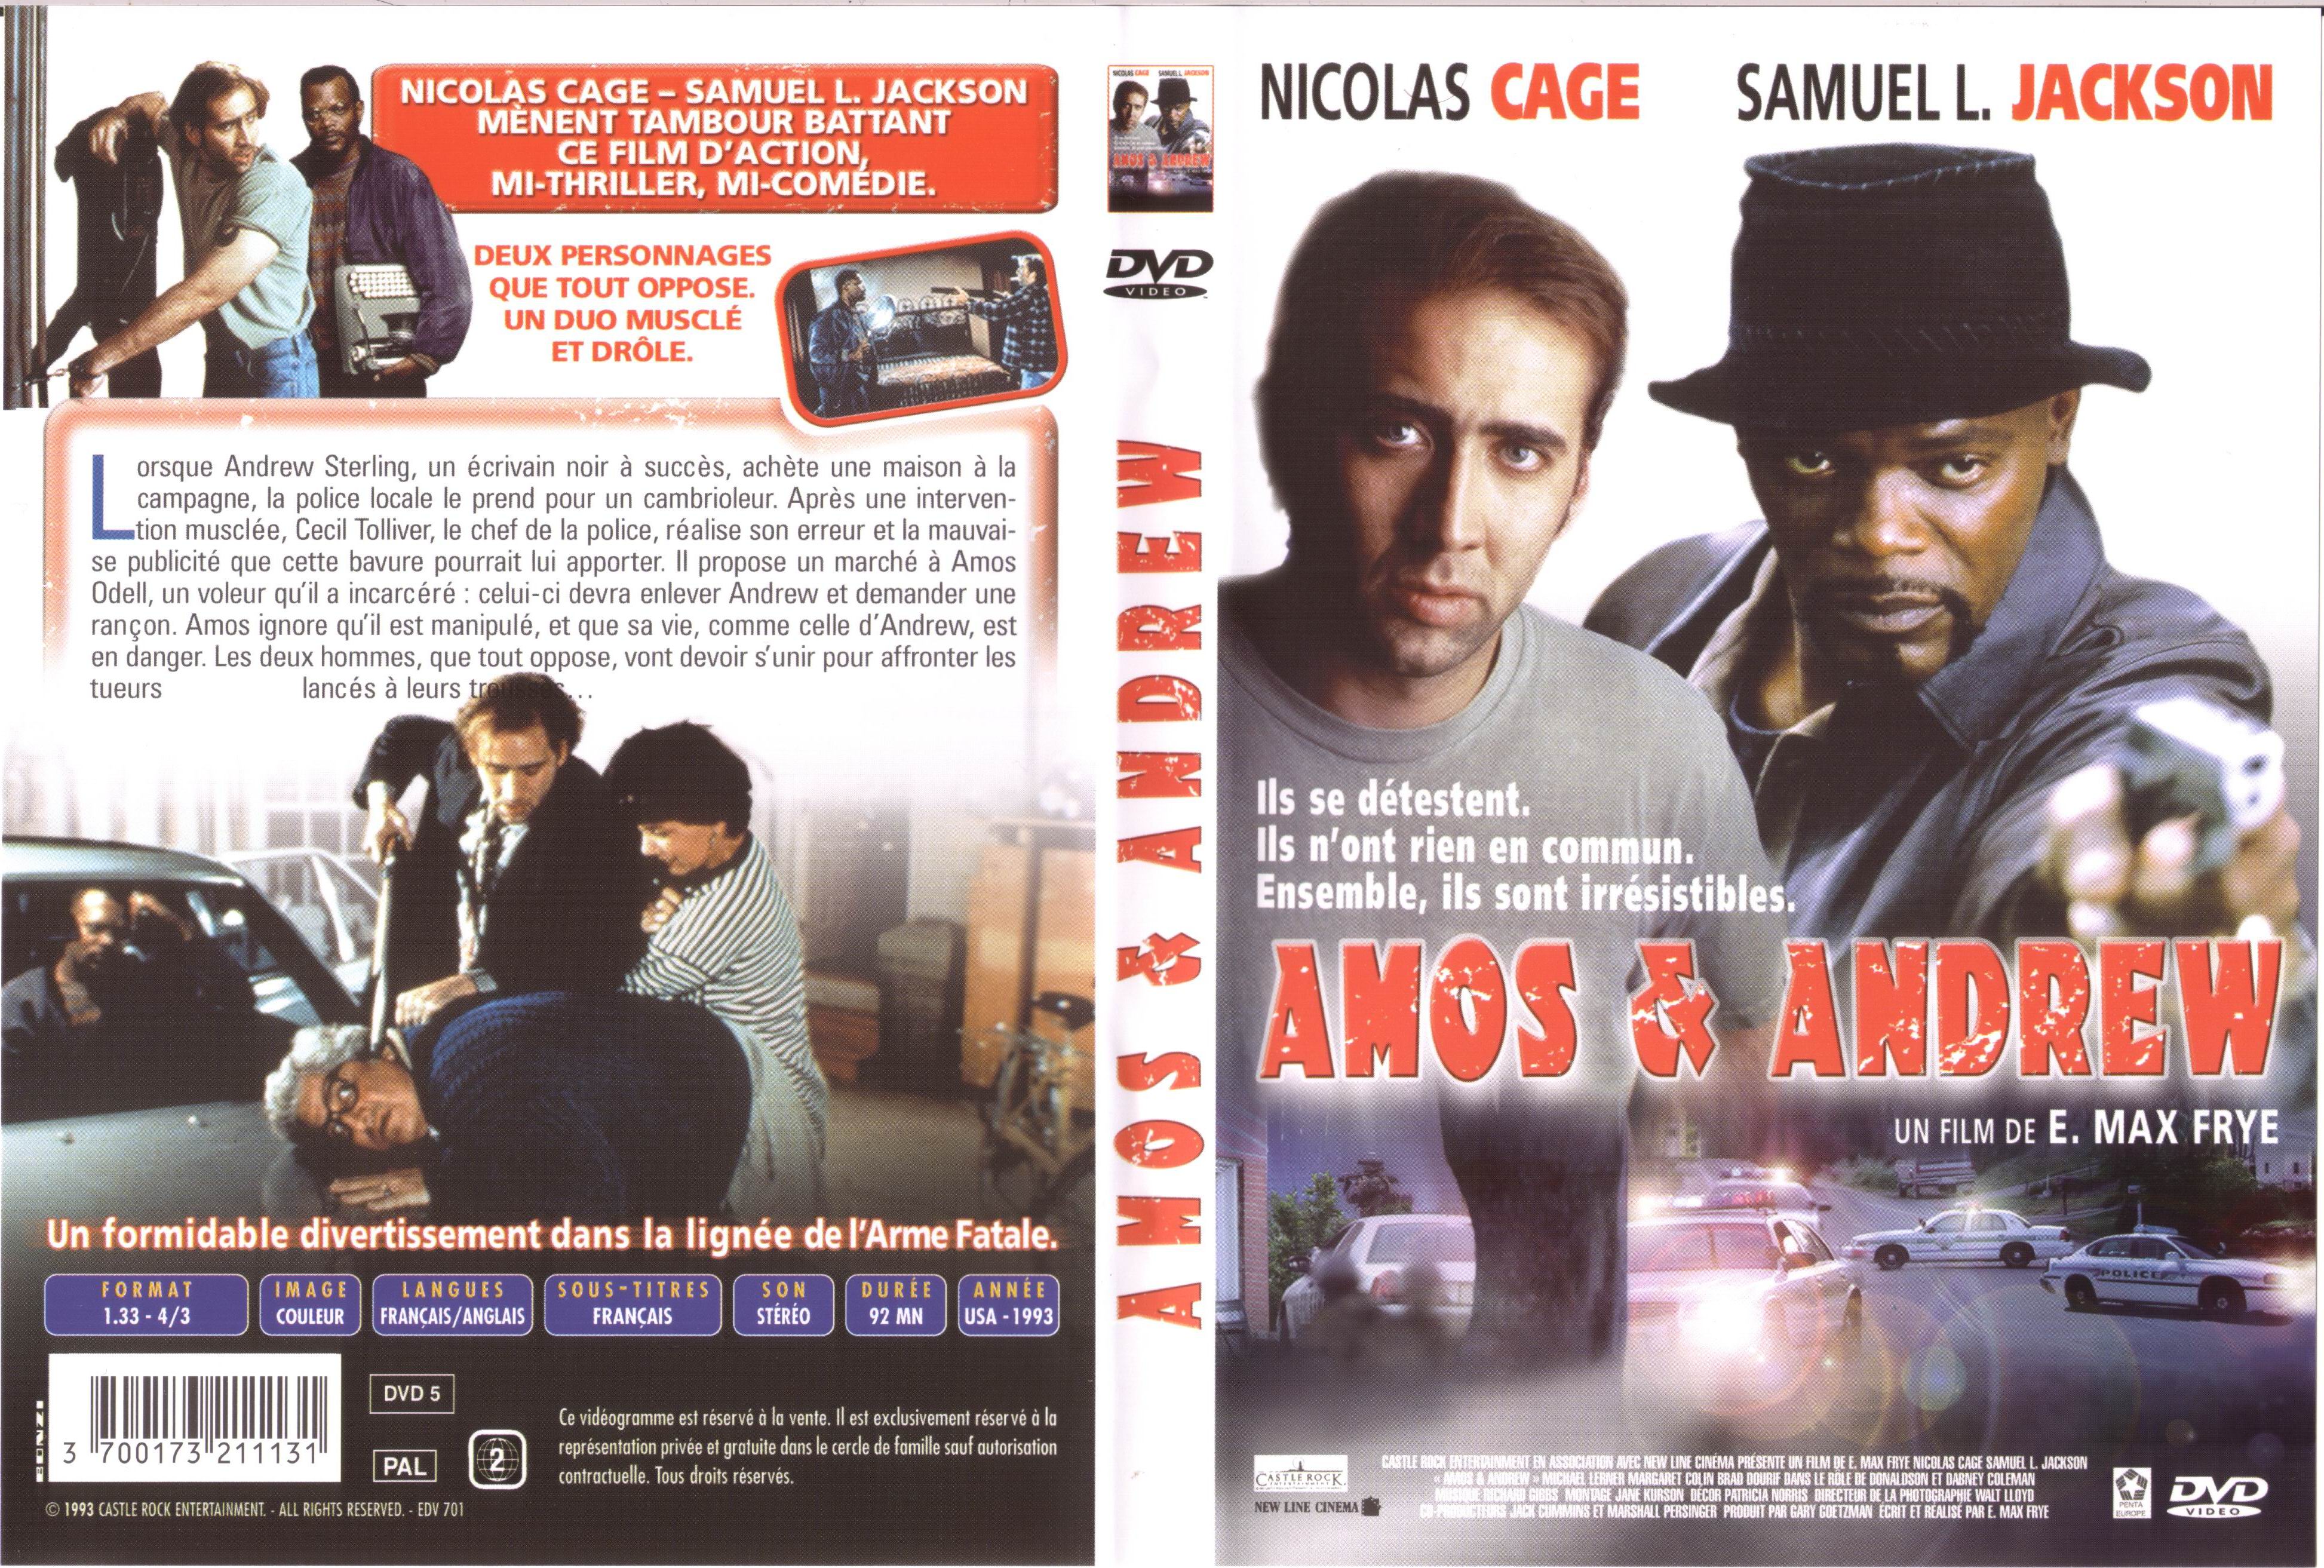 Jaquette DVD Amos & Andrew